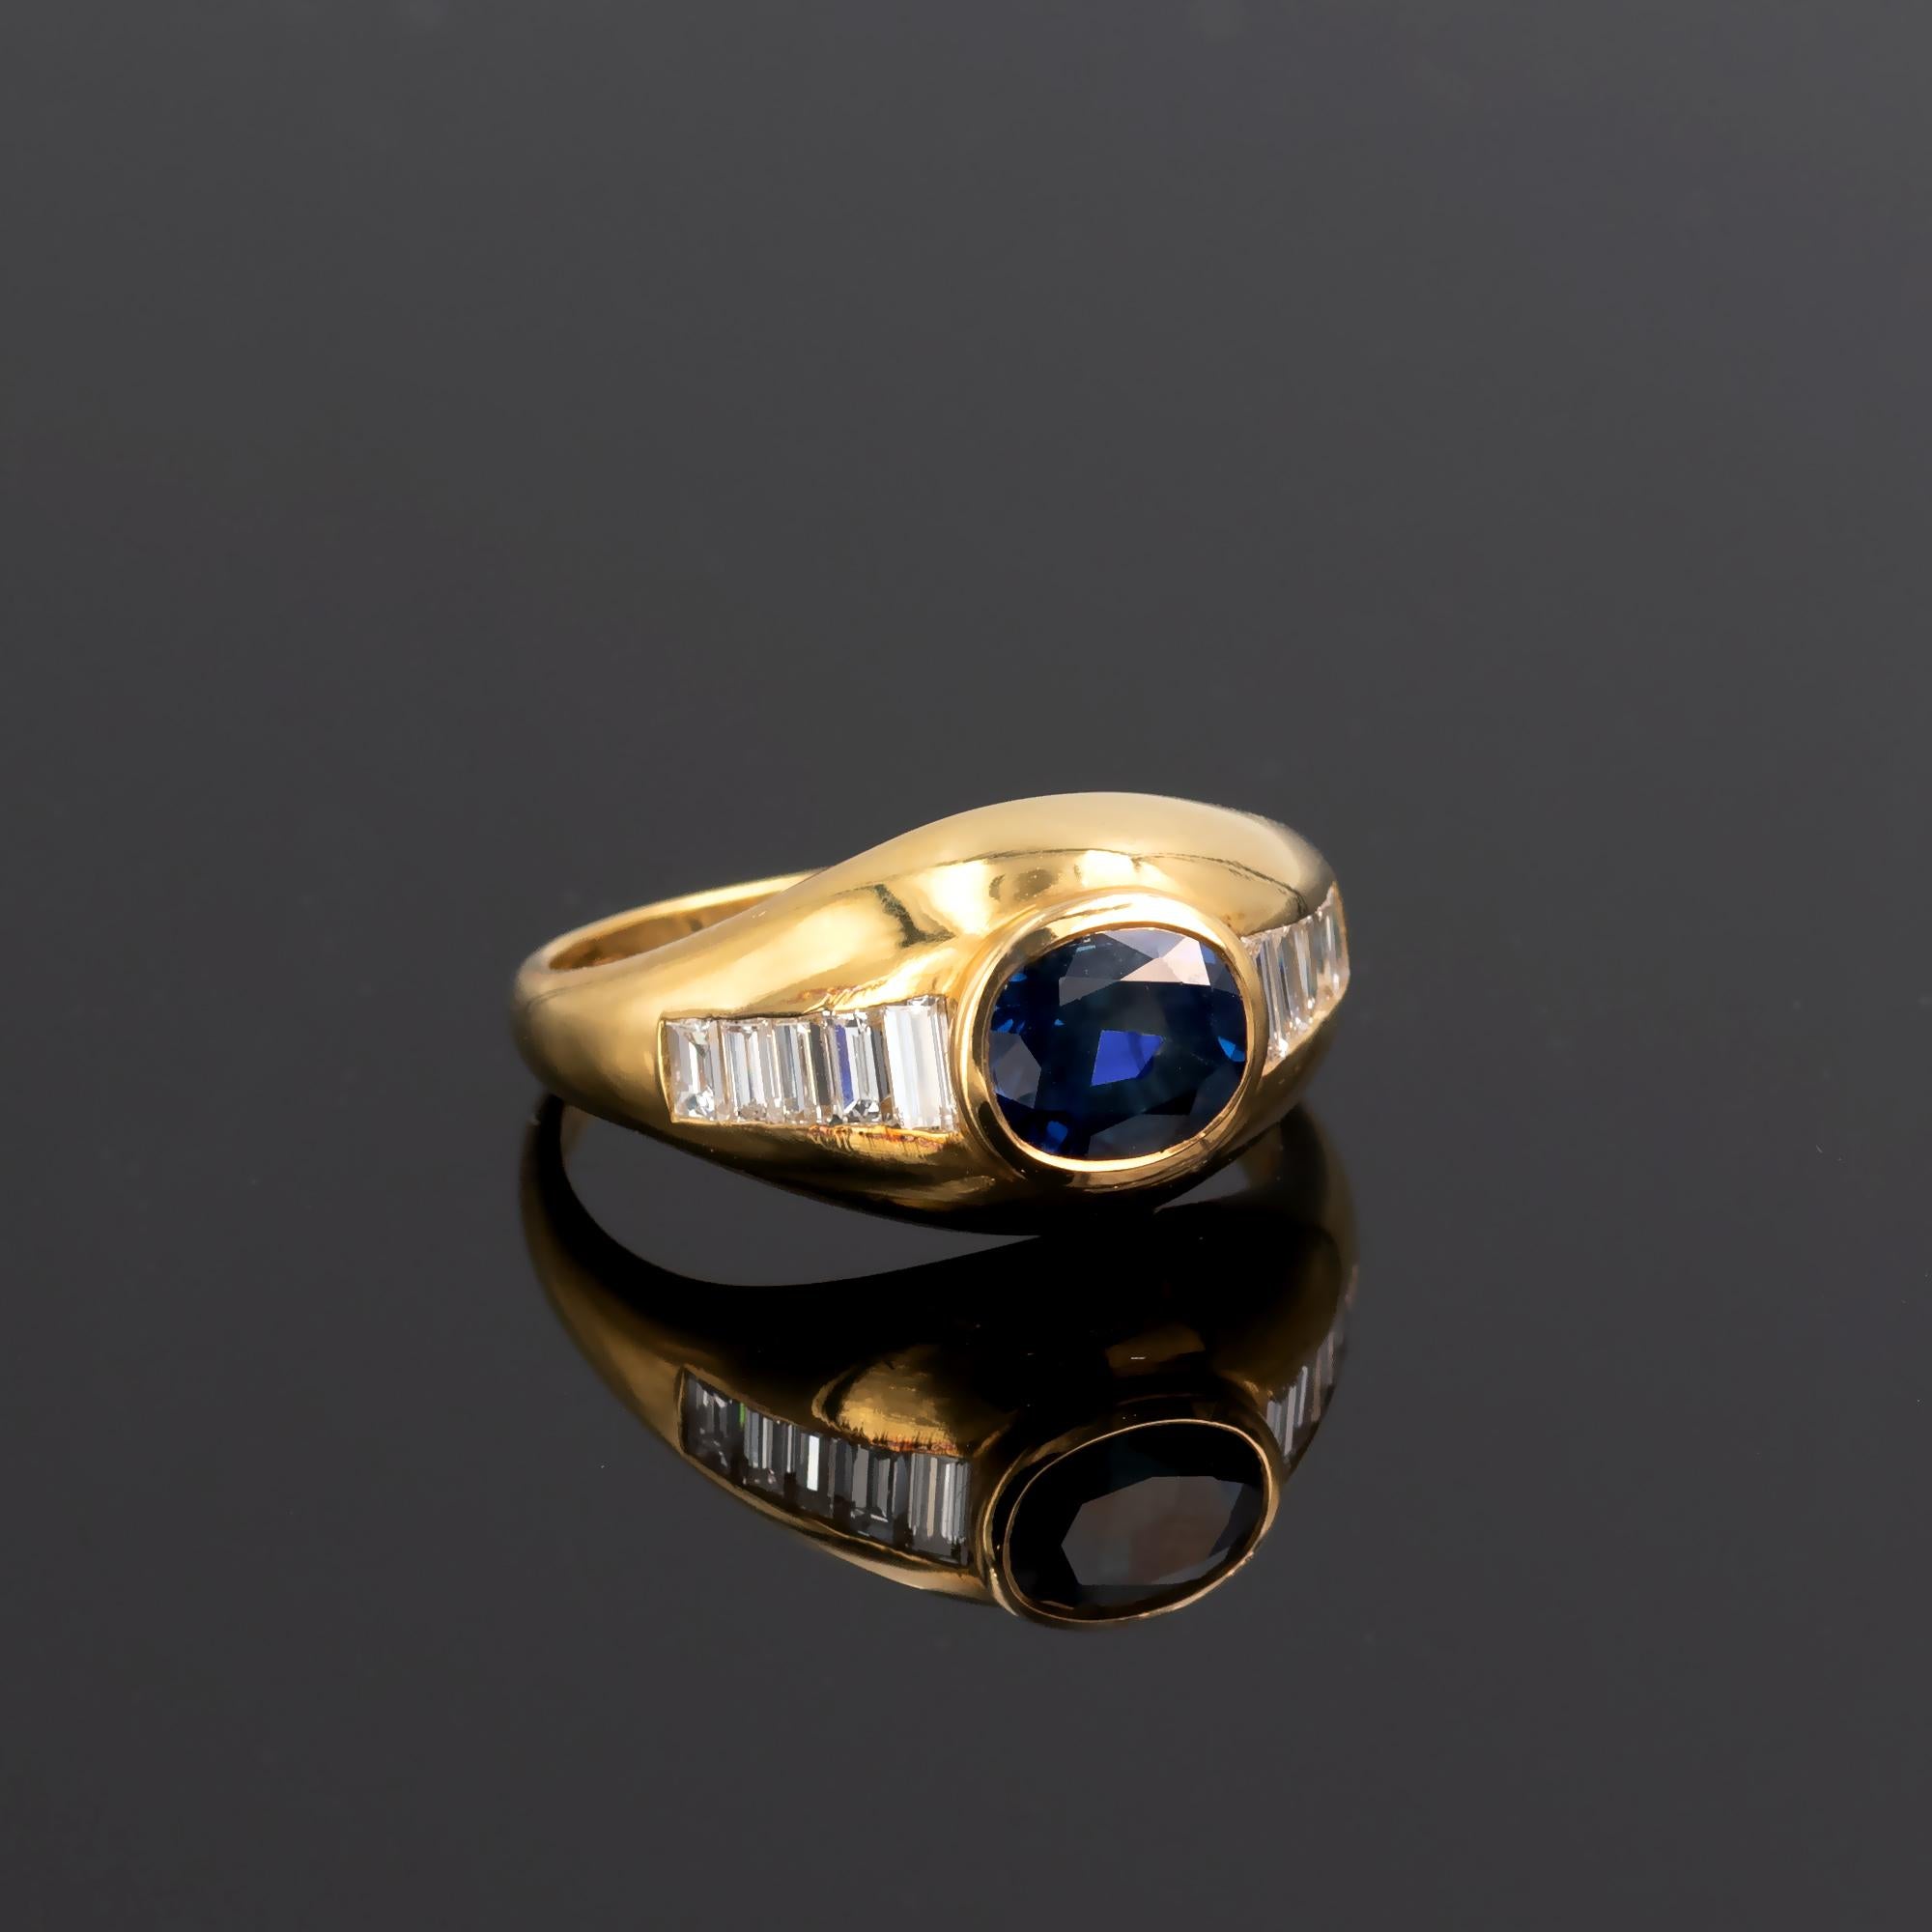 Contemporary 18-karat yellow gold ring bezel set in with an oval cut intense blue sapphire in its center and ten baguette-cut diamonds on the sides. It is a well-made timeless ring with a modern design.
Details:
Sapphire: approx 1.90 carats,